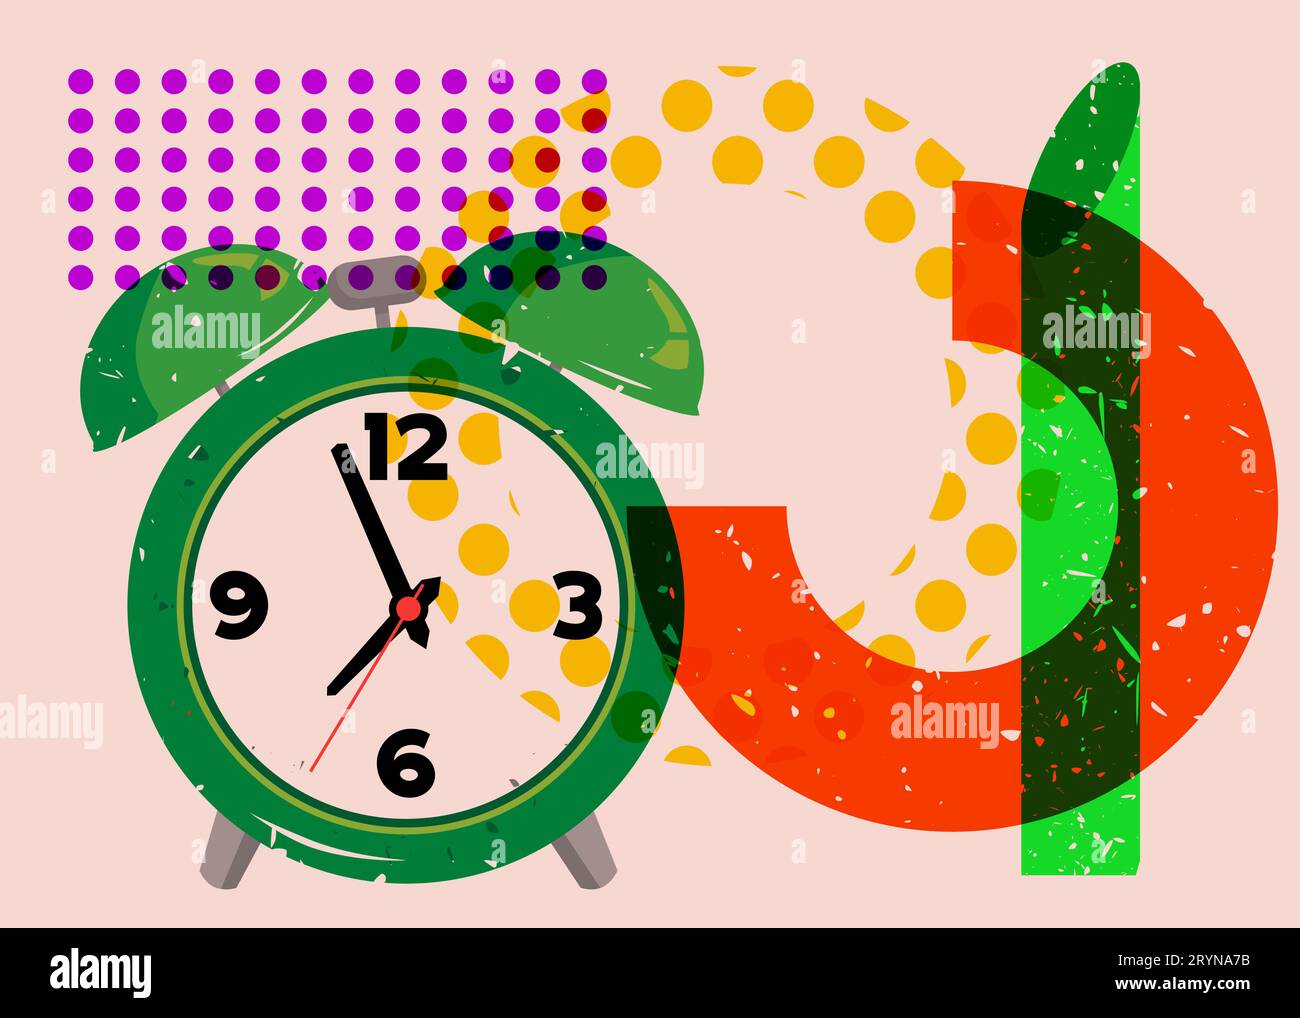 Risograph alarm clock wirh geometric shapes. Waking up early morning concept with objects in trendy riso graph design, print texture style. Stock Vector